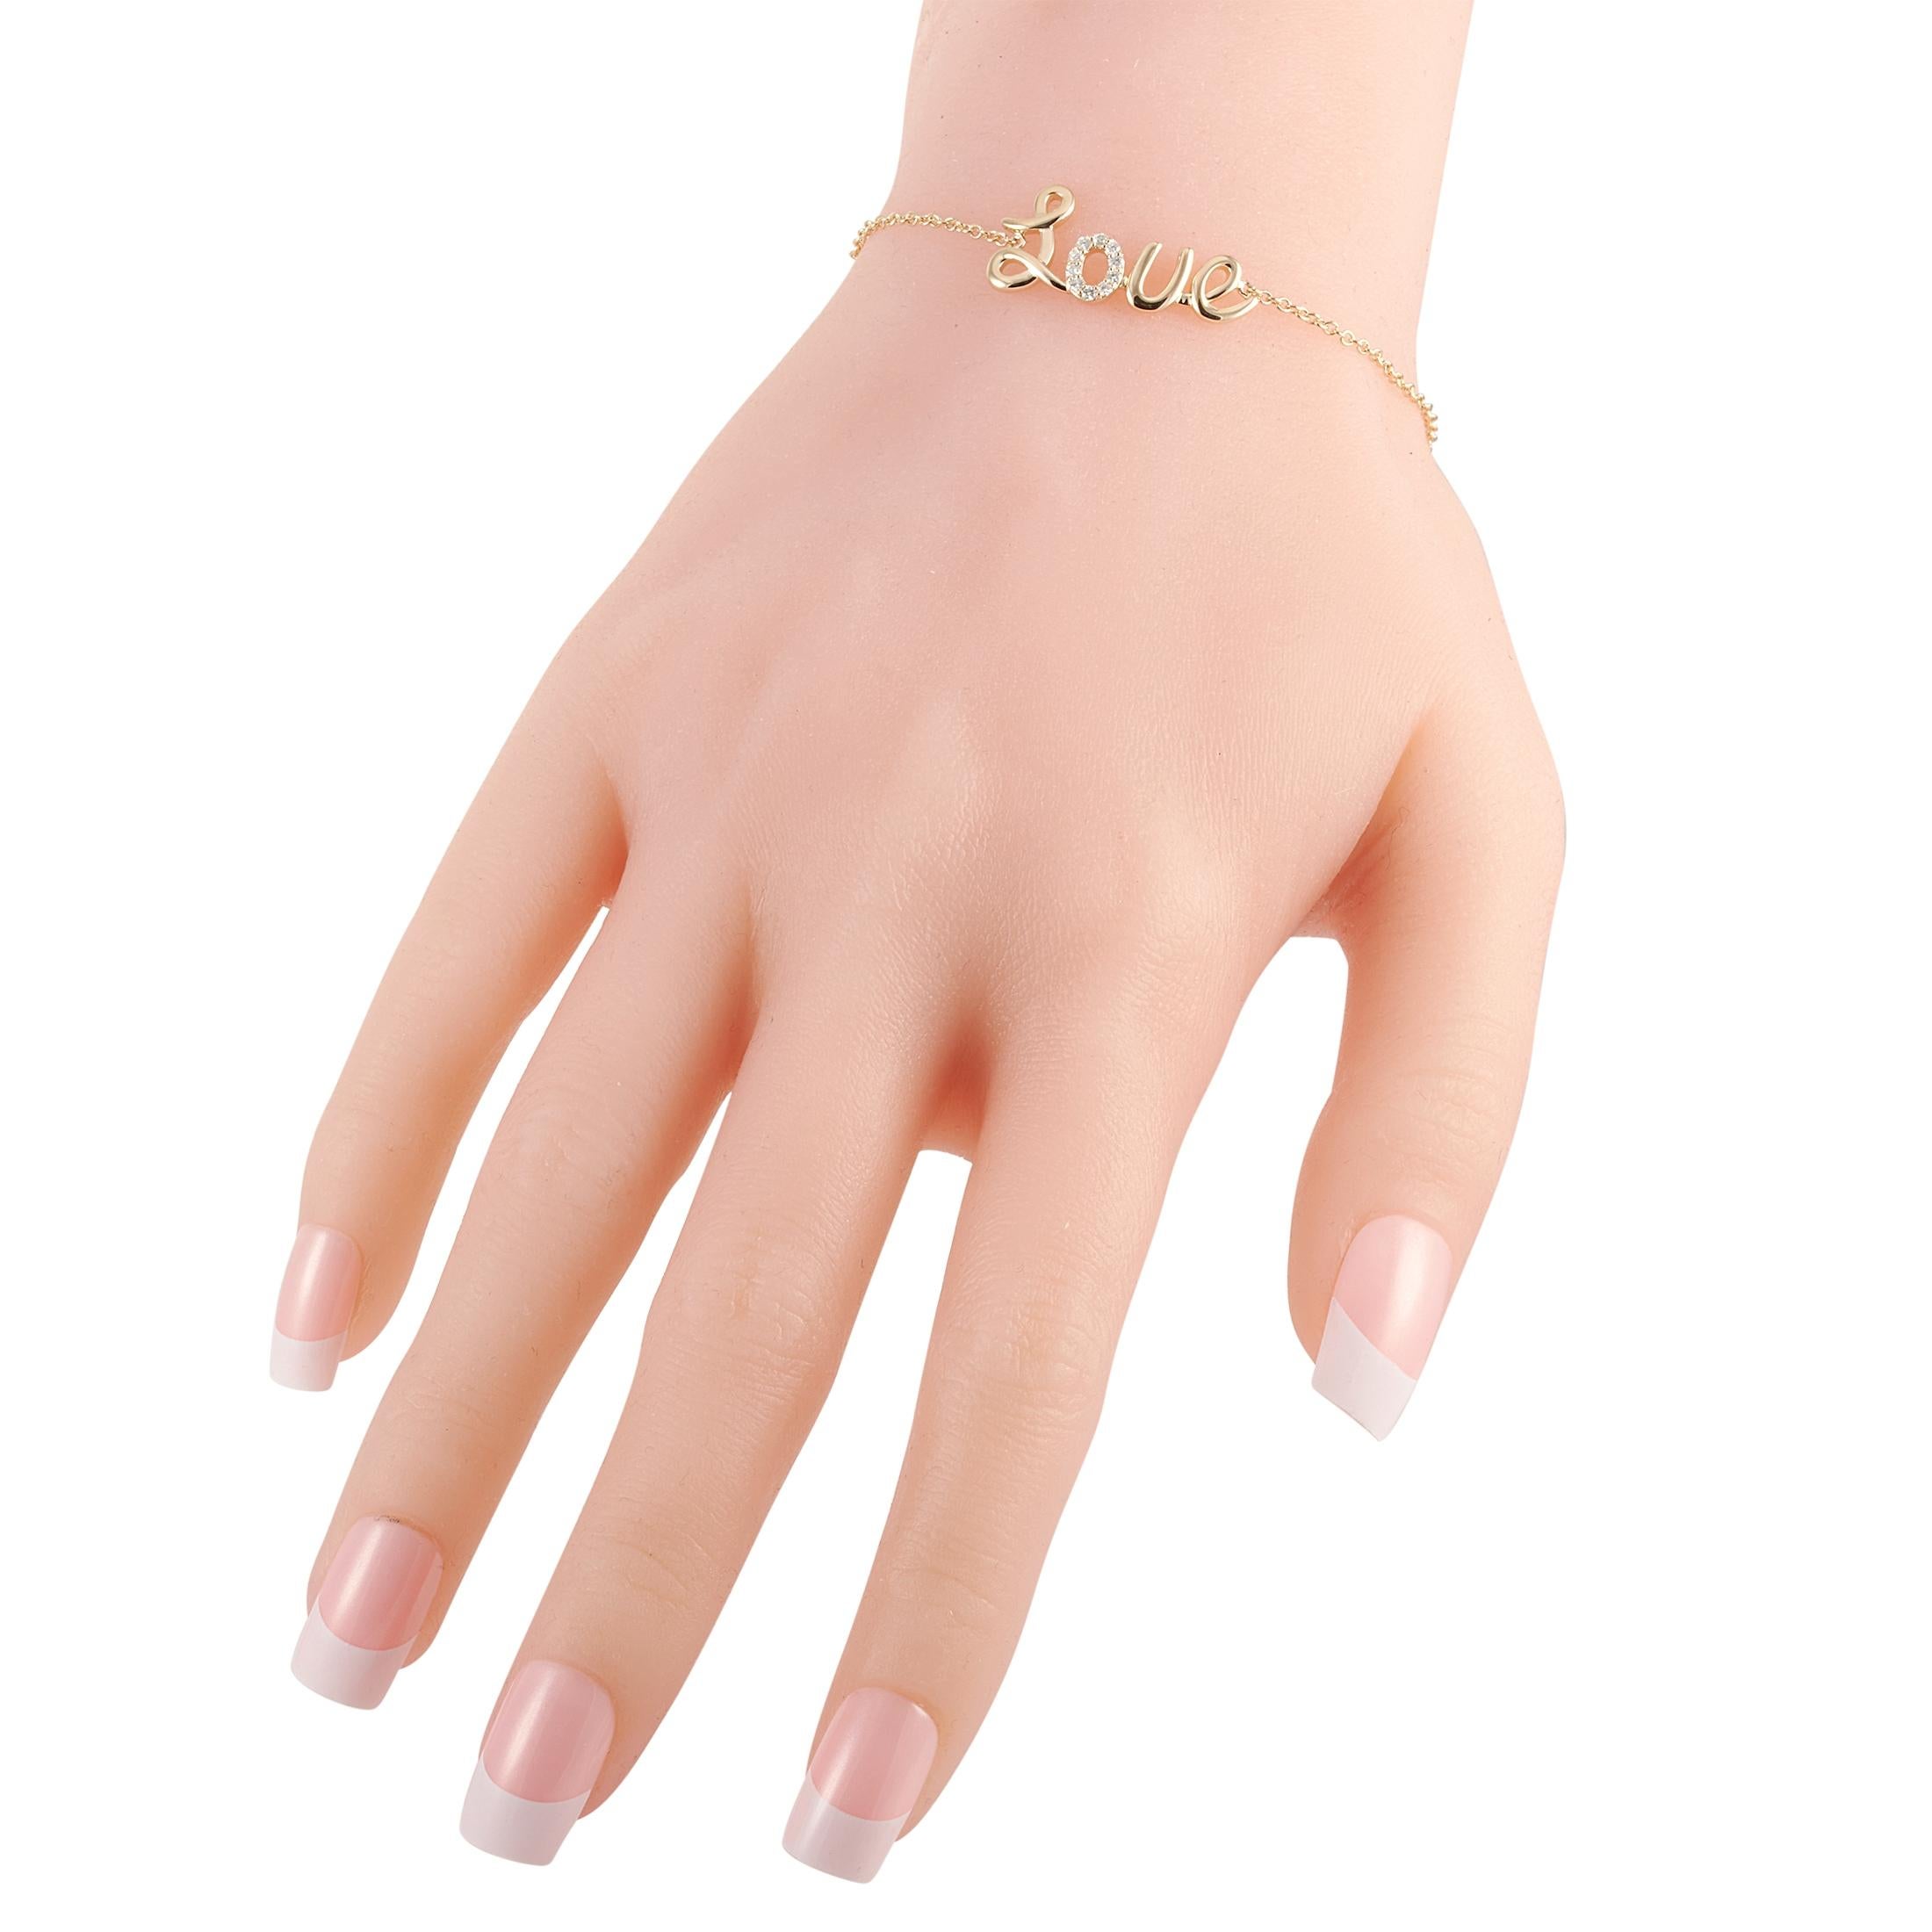 This LB Exclusive love bracelet is crafted from 14K yellow gold and weighs 2.9 grams, measuring 6.50” in length. The bracelet is set with diamonds that total 0.10 carats.
 
 Offered in brand new condition, this item includes a gift box.
